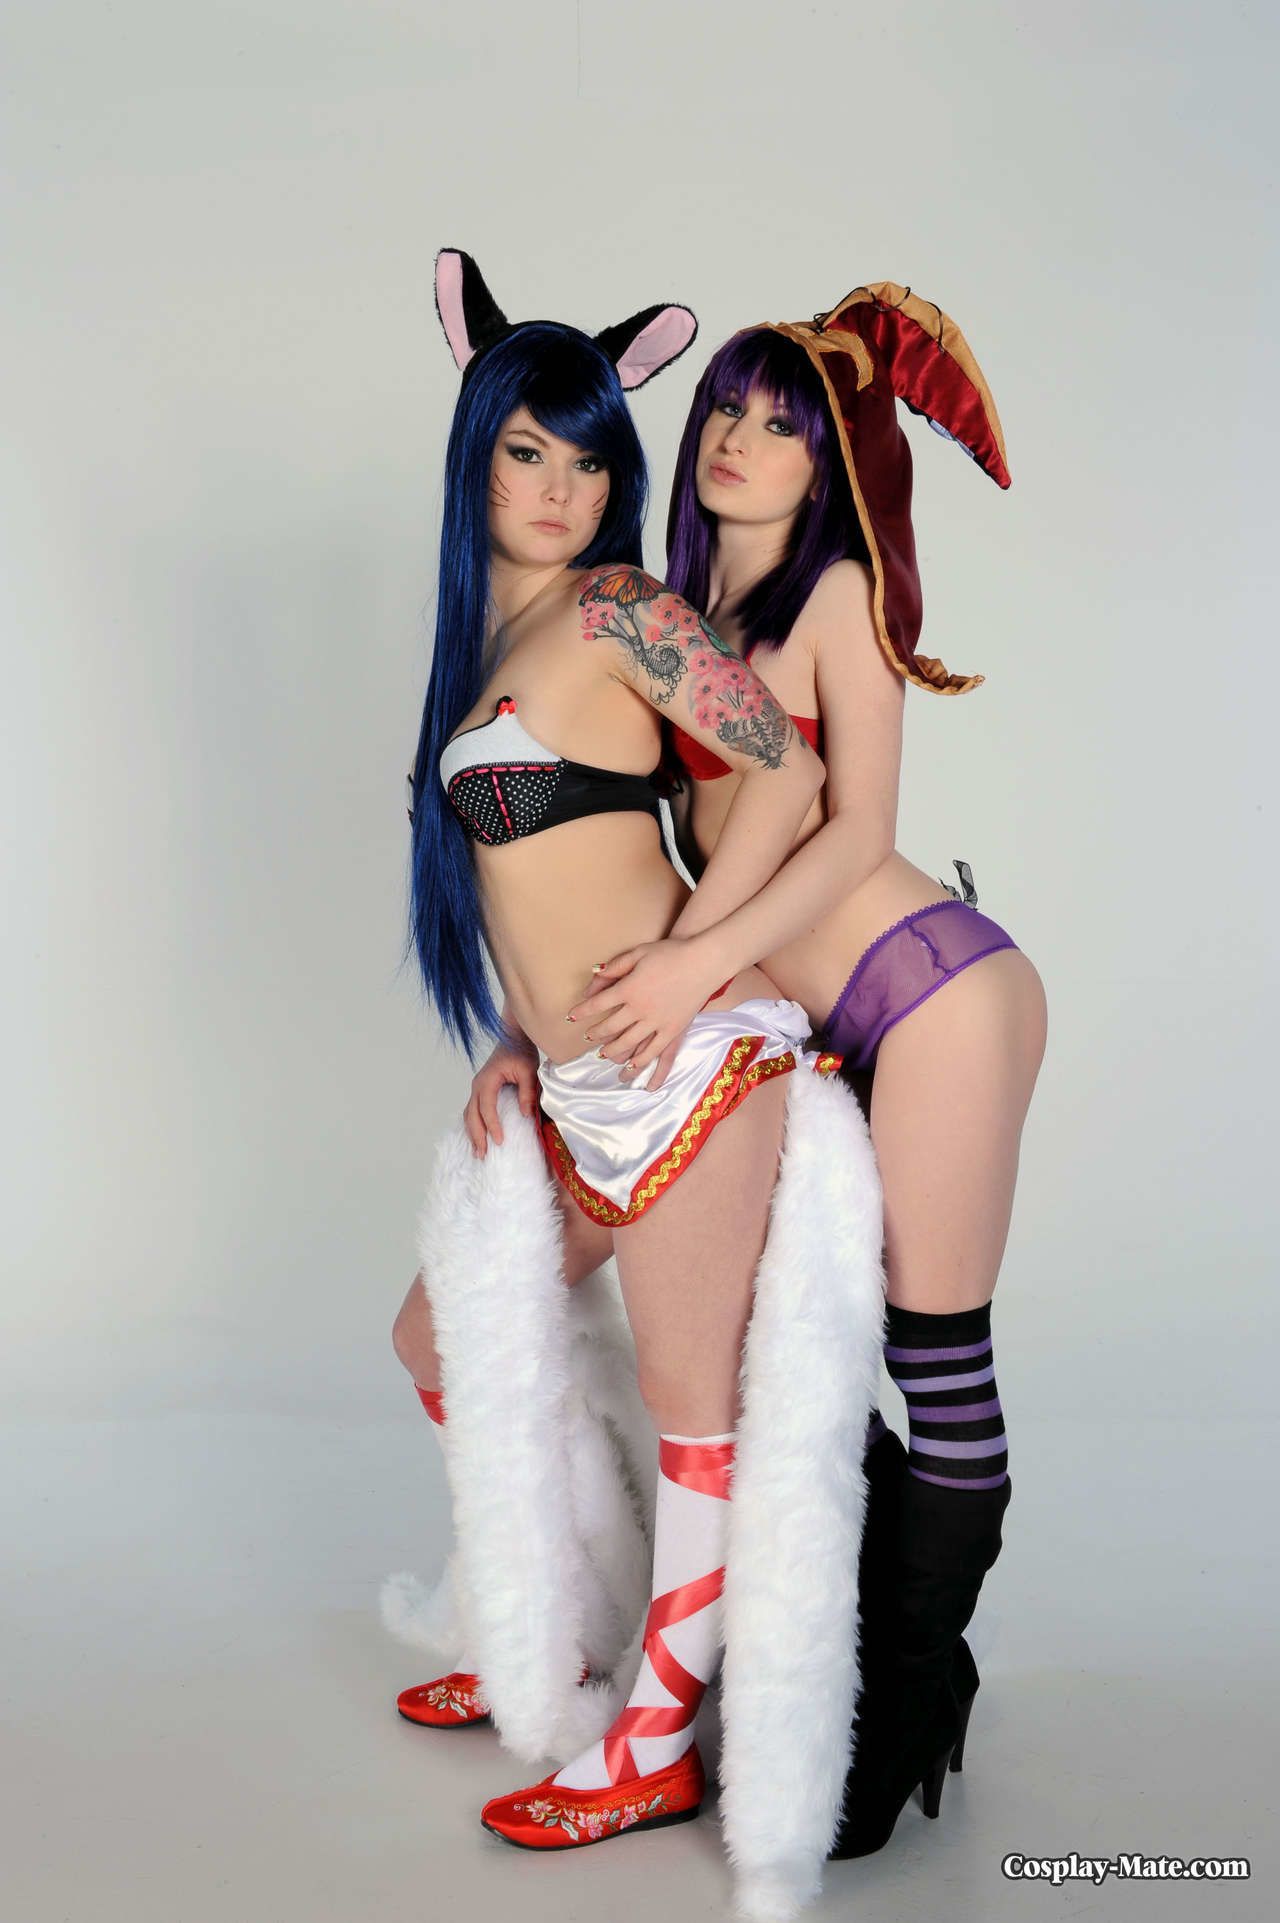 Cosplay legends league of porn League of